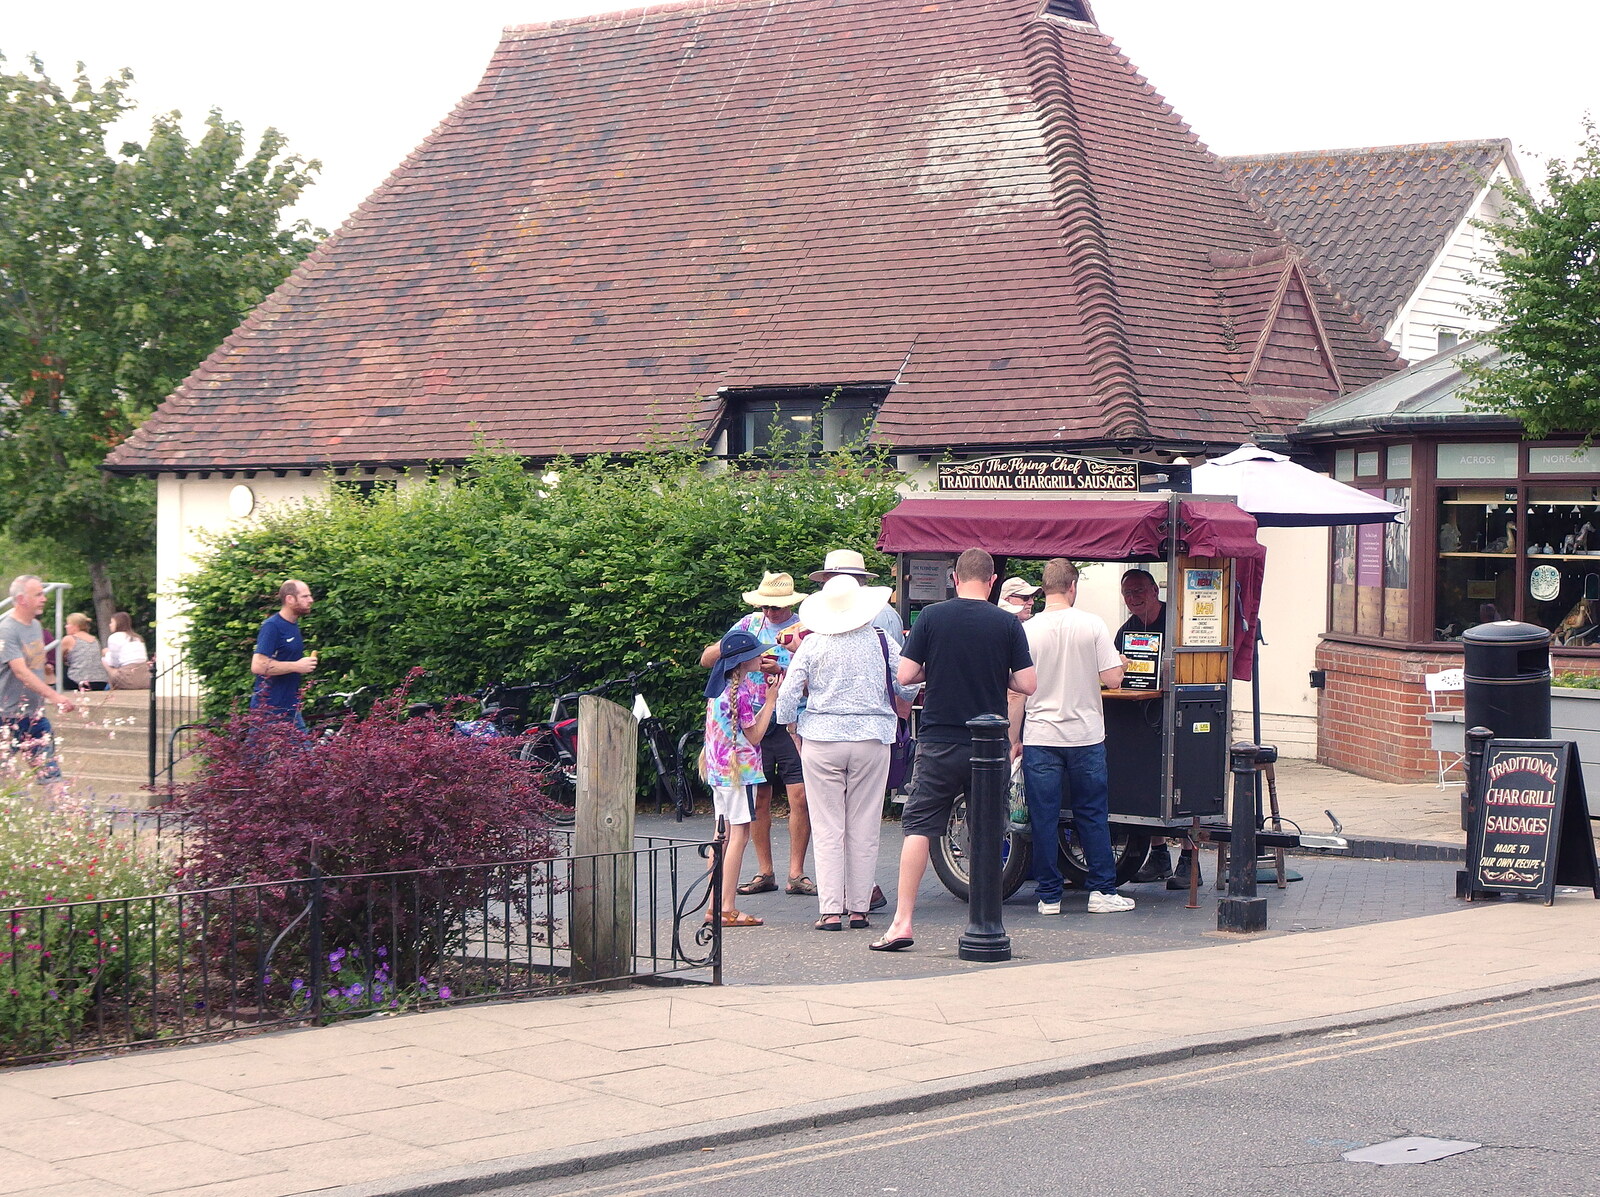 Andy the Sausage has a queueing thing going on from A Ride to Walsham Le Willows, Suffolk - 15th July 2022